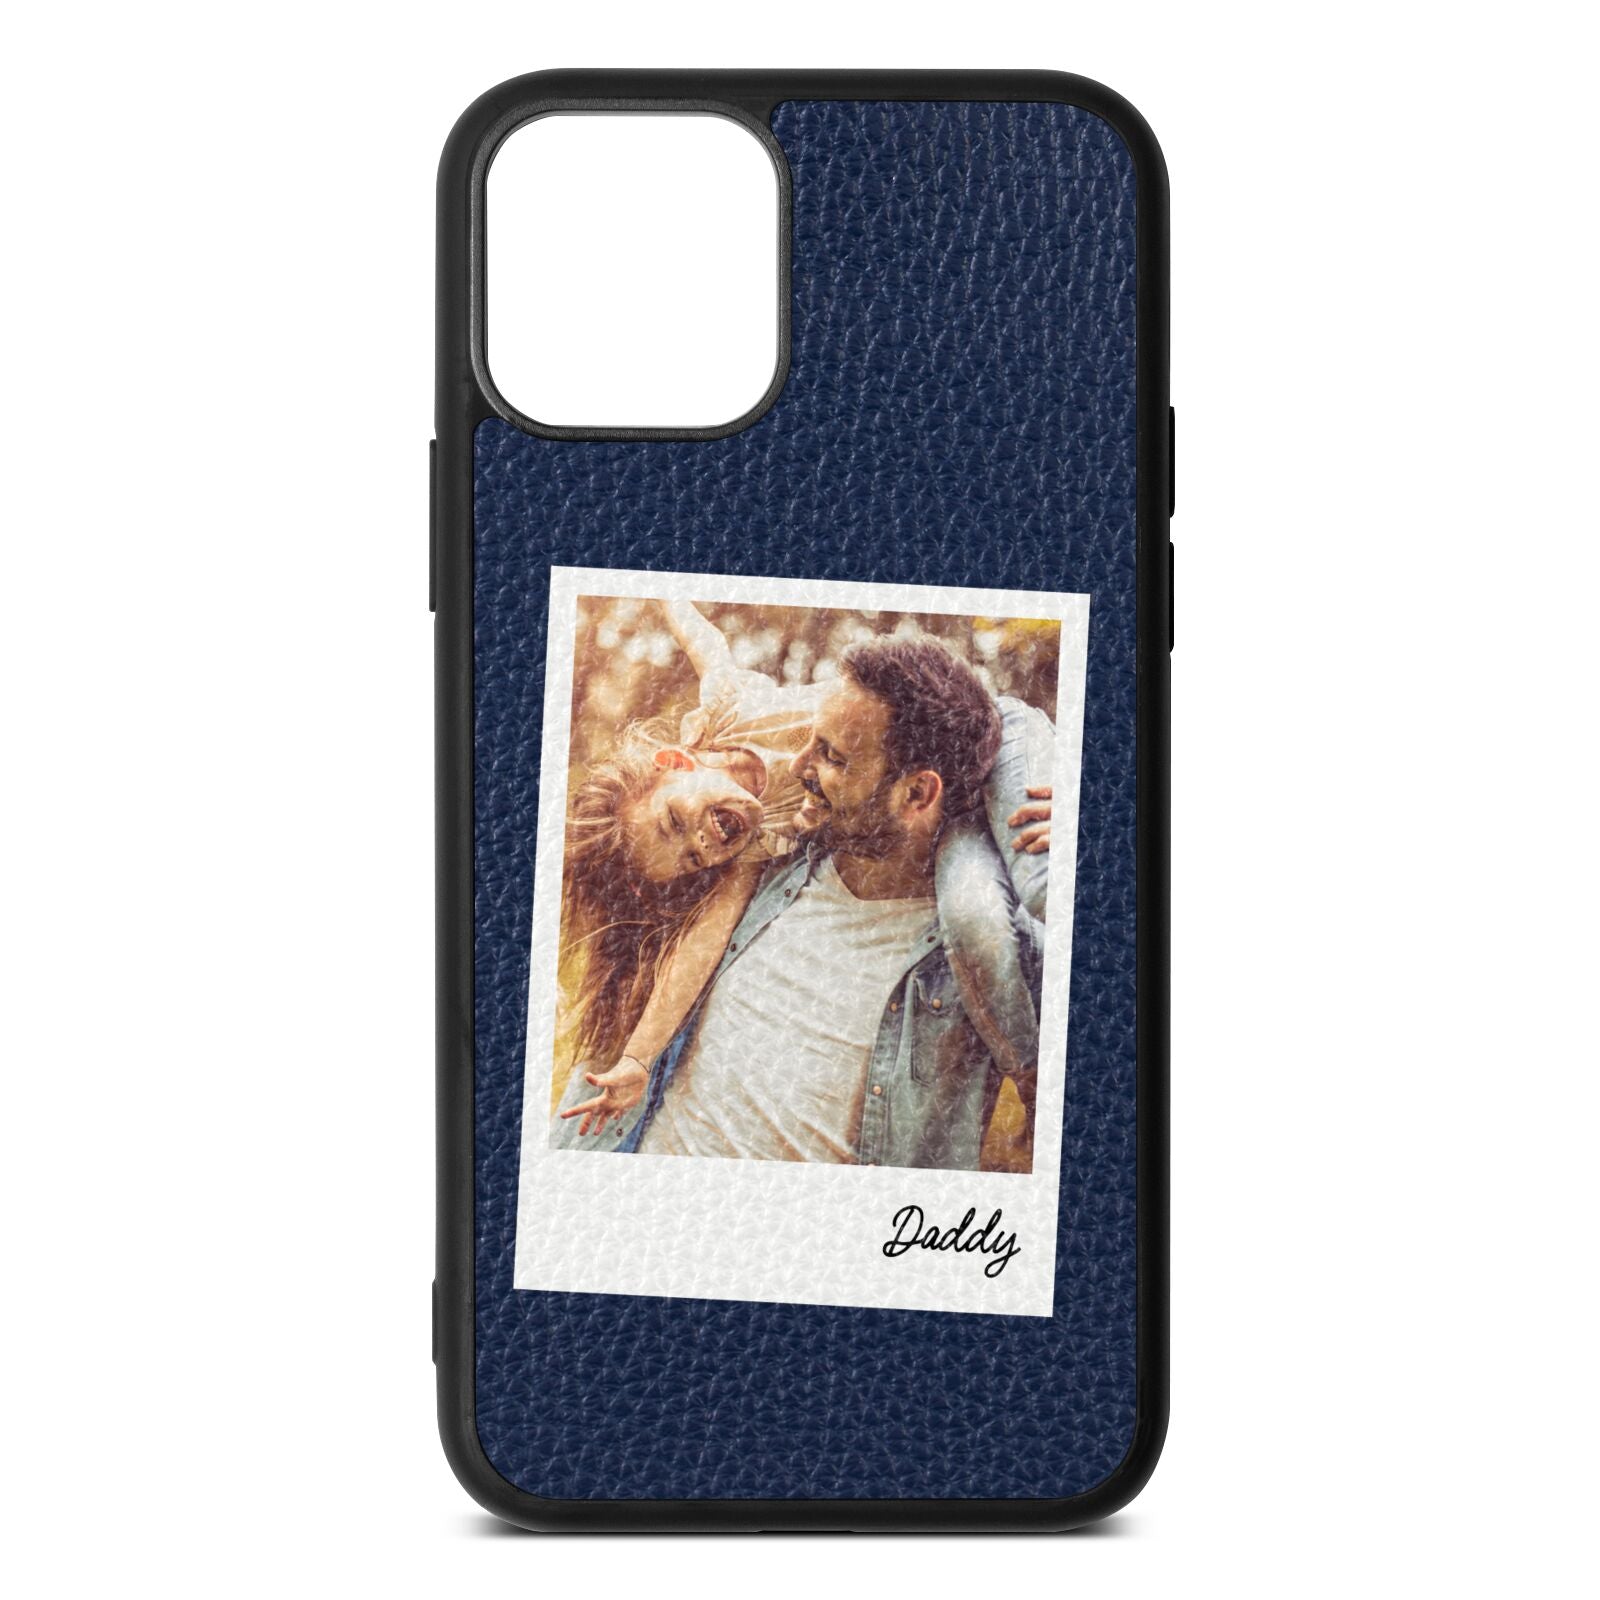 Fathers Day Photo Navy Blue Pebble Leather iPhone 11 Pro Case